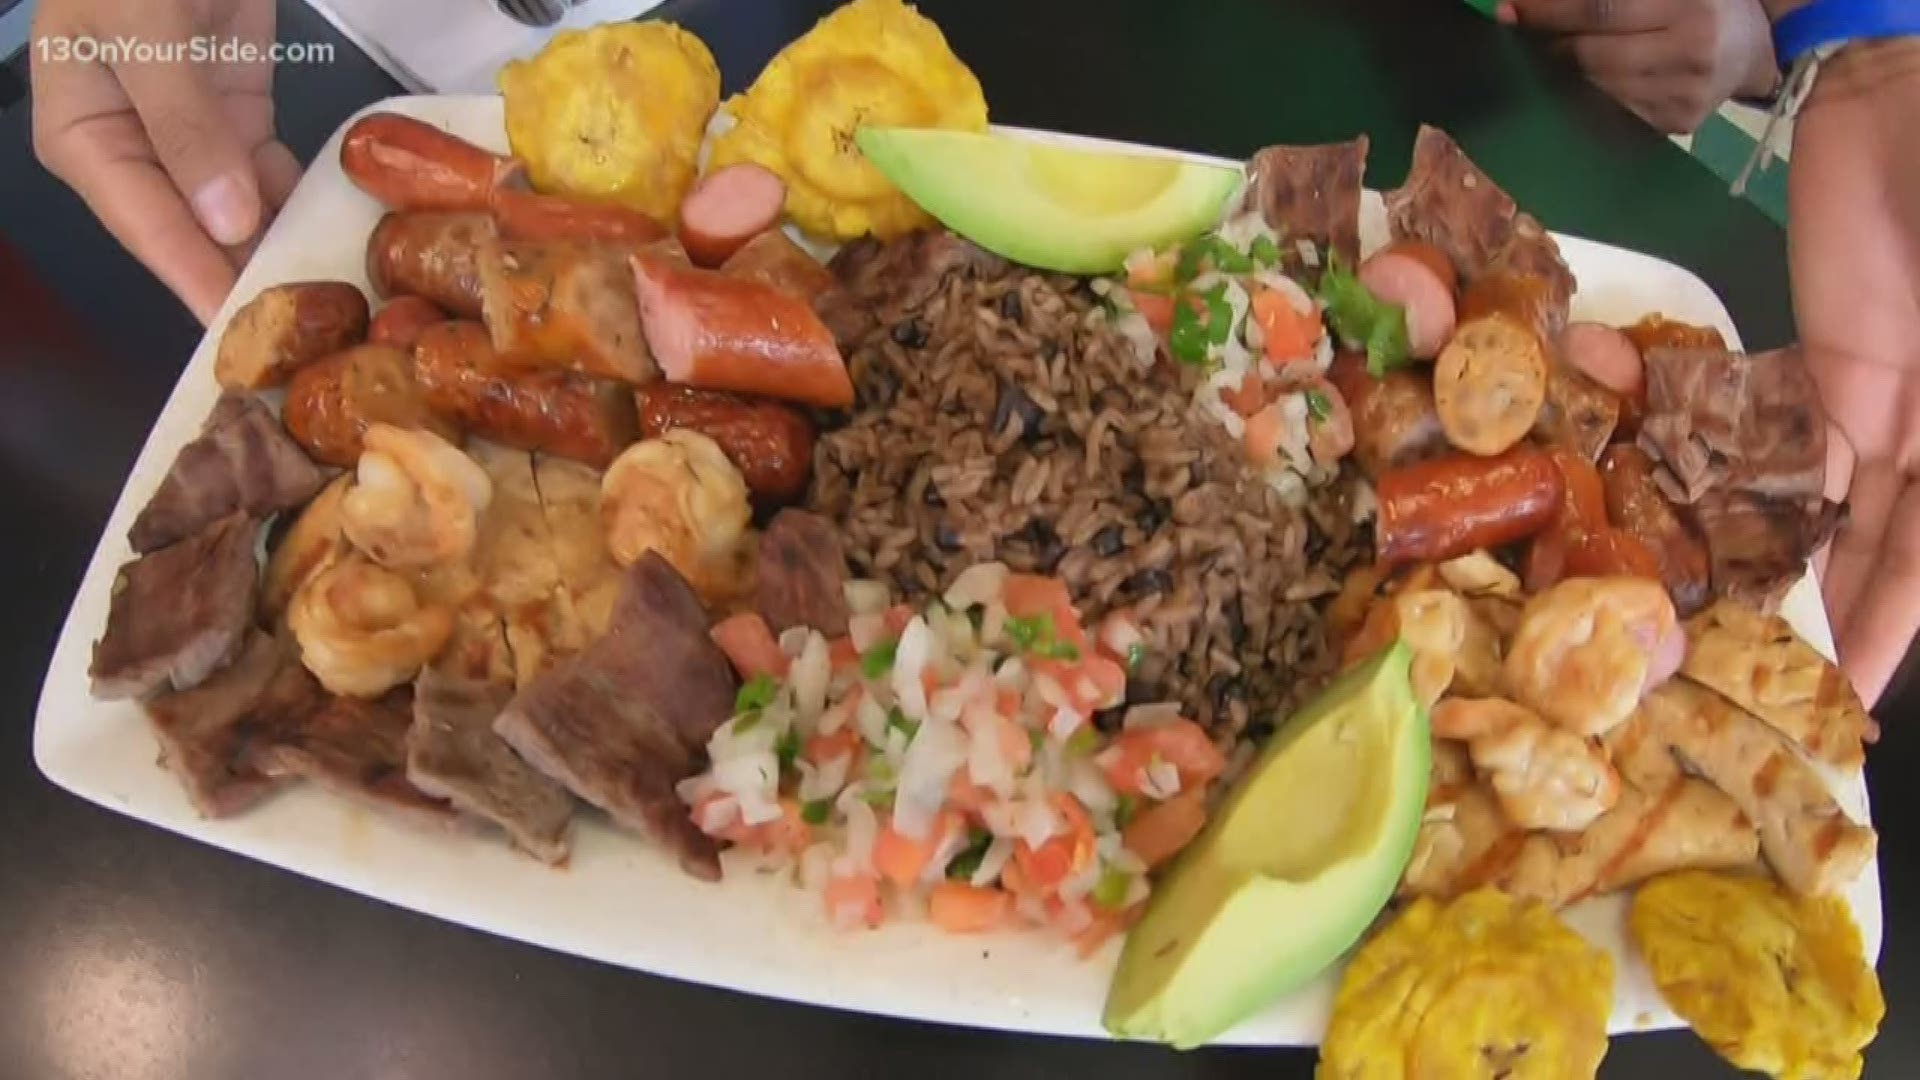 In this week's Let's Eat, James Starks and Dave Kaechele take a trip to Holland for some delicious Latino cuisine.